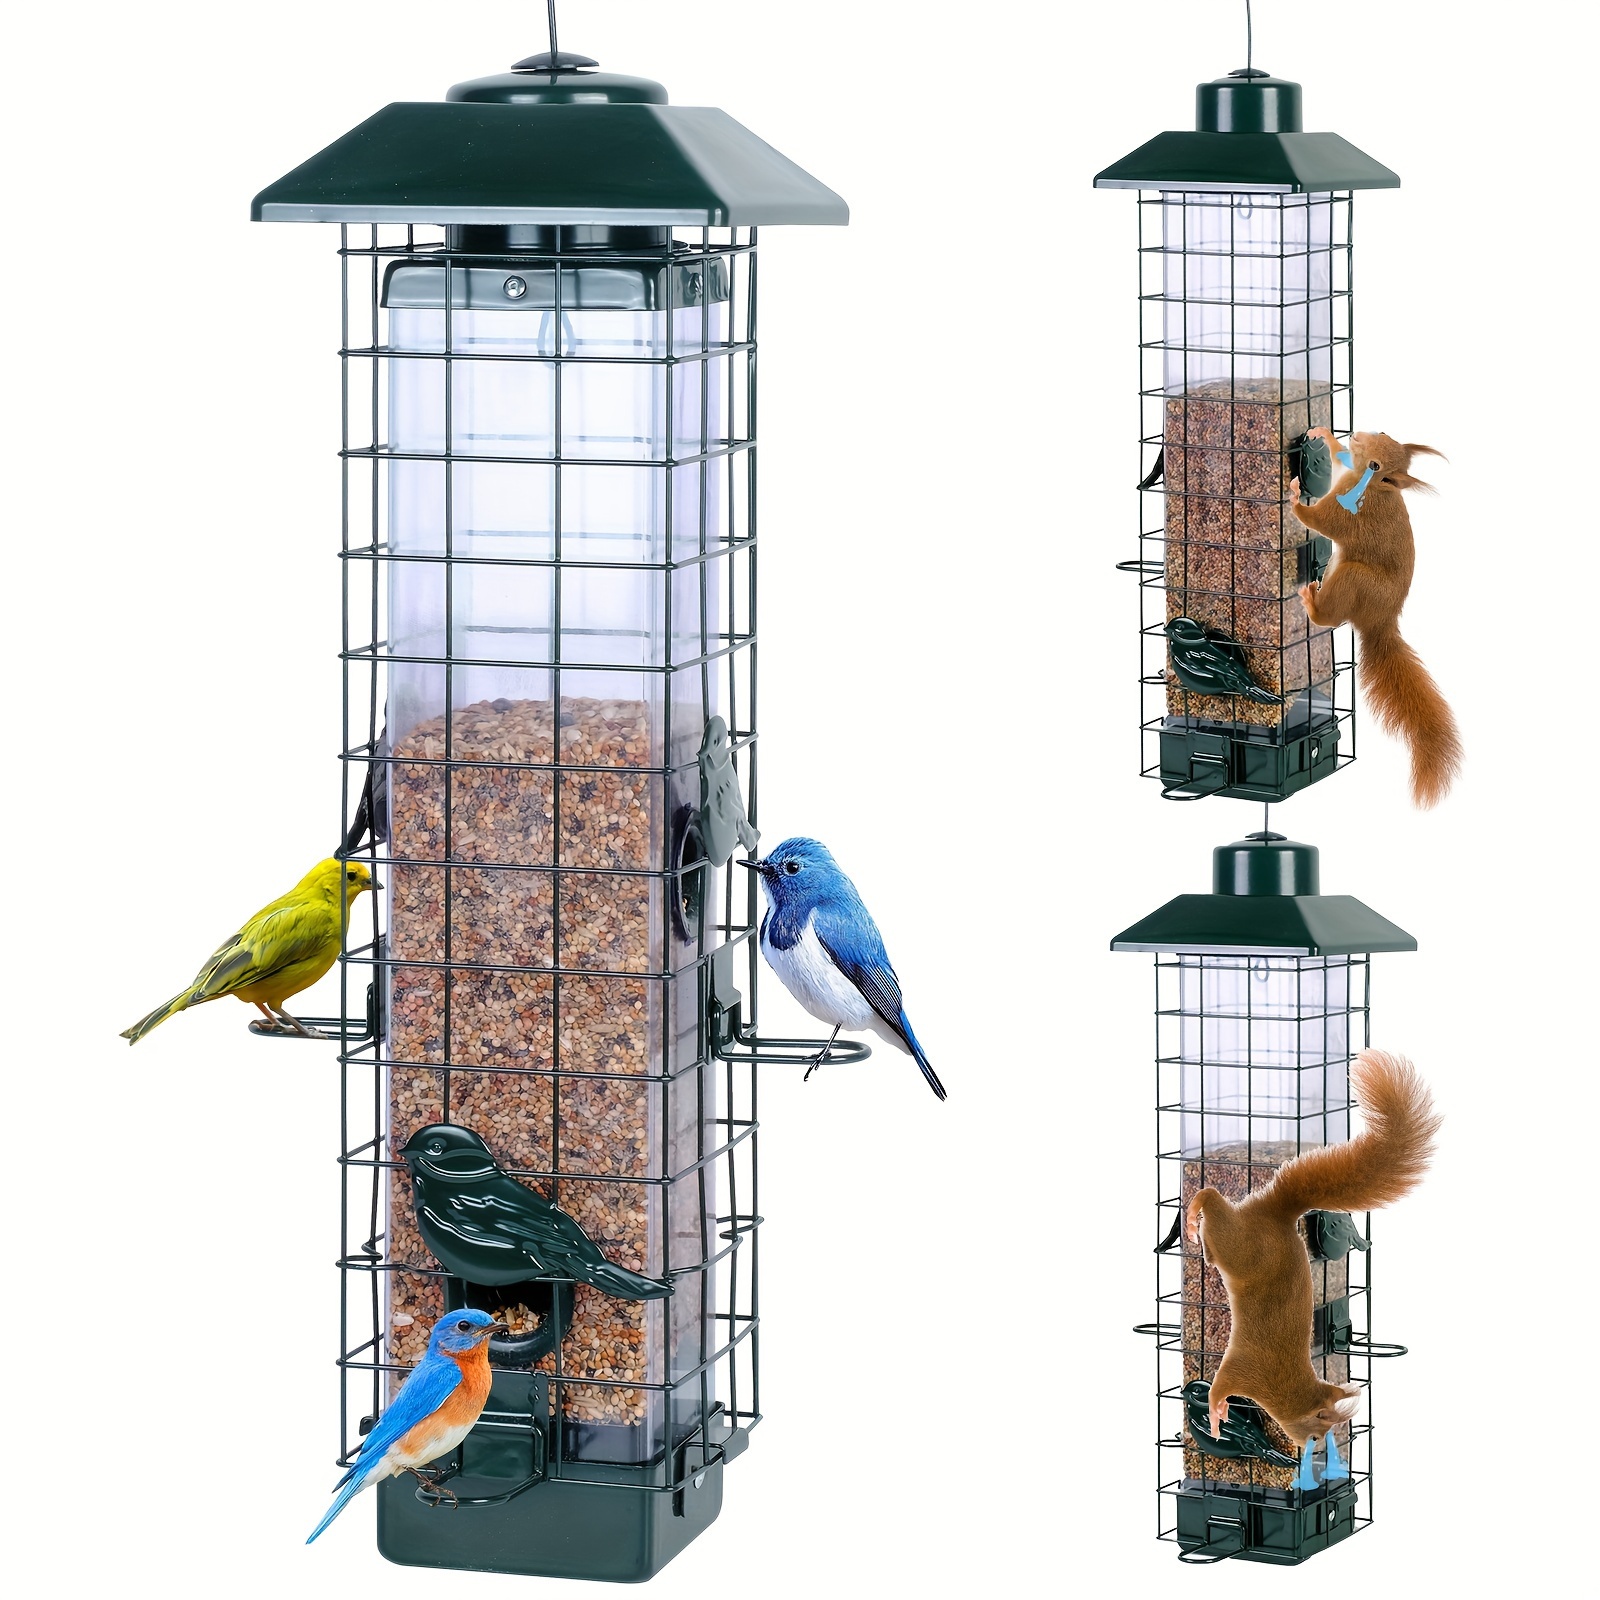 

Bird Feeder Squirrel Proof For Outdoors Hanging, Metal Bird Feeder With Bilateral Weight-activated, Outdoor Bird Feeders For Finch Sparrow - Dark Colored Green